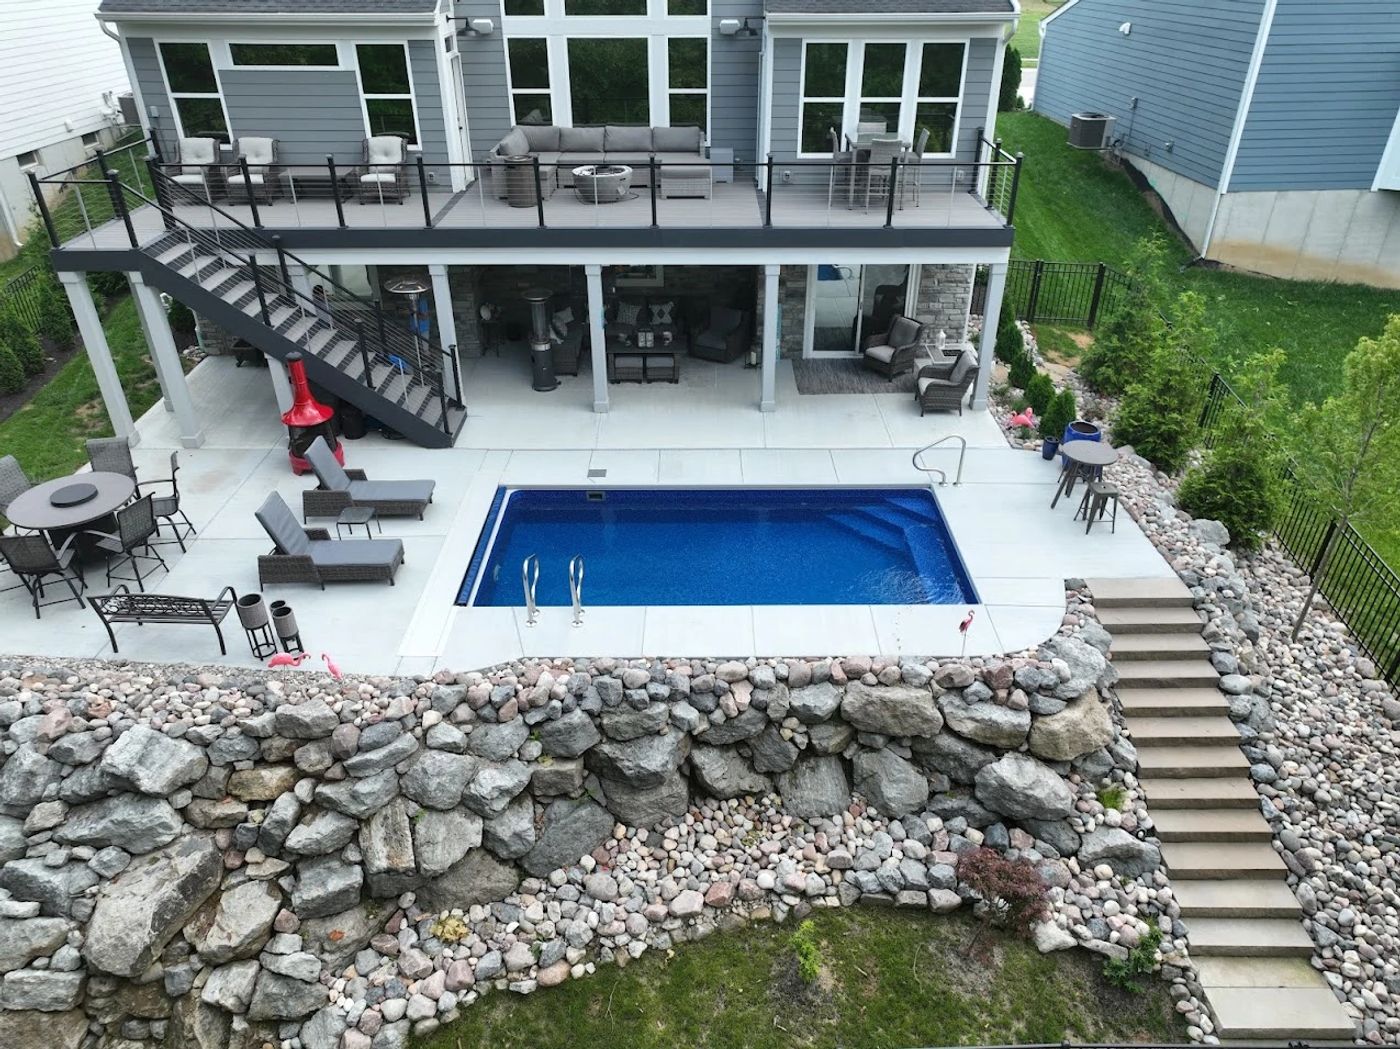 vinyl liner pool built in a small northeast backyard on a hill